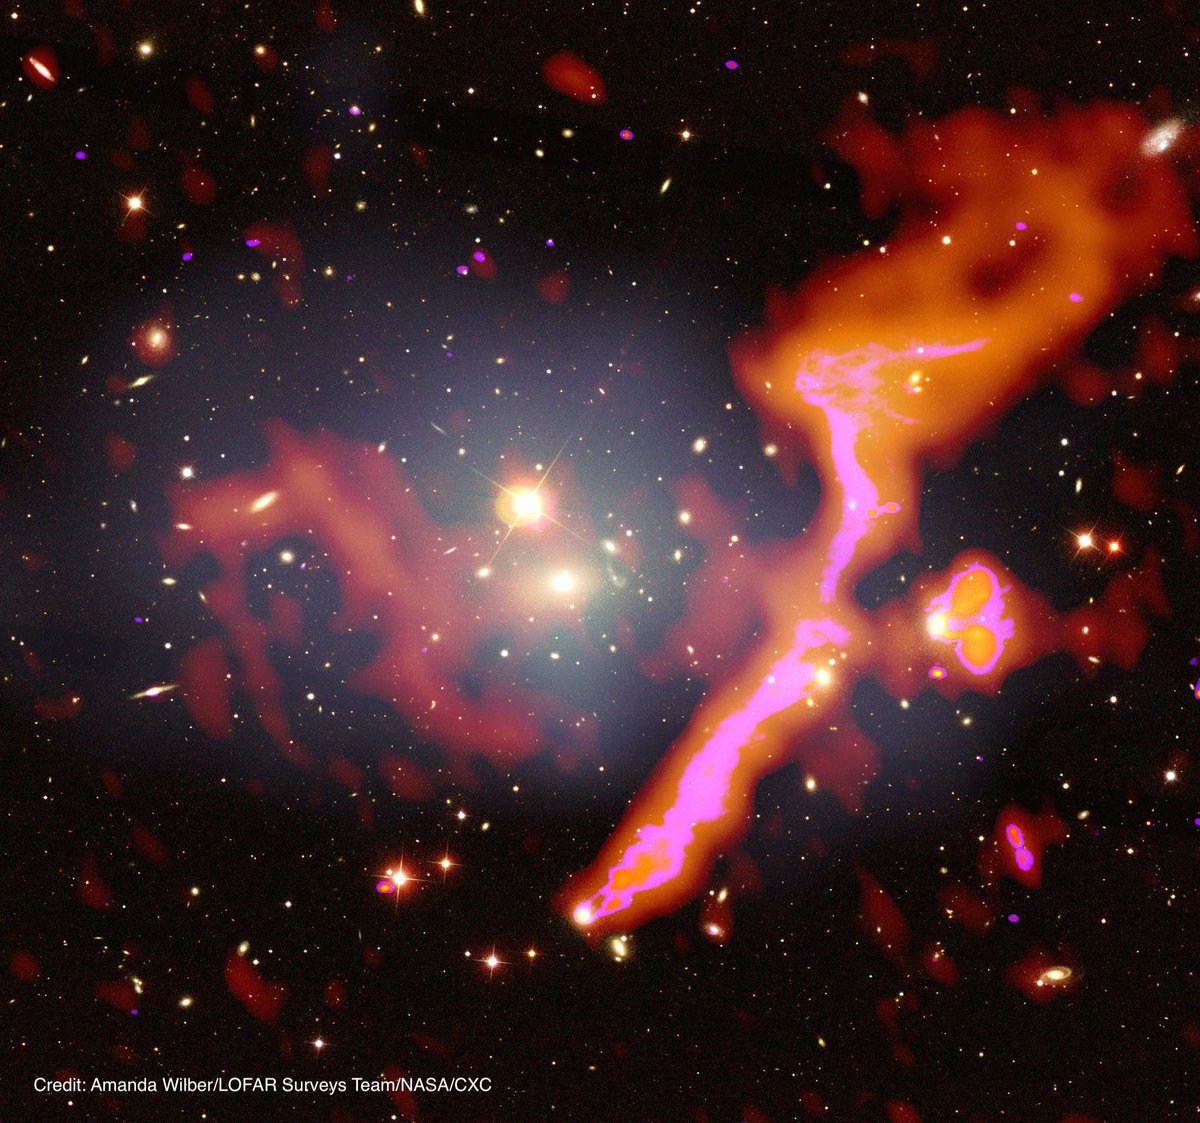 Big sky survey by @LOFAR has detected hundreds of thousands of previously undetected galaxies, shedding new light on black holes & how clusters of galaxies evolve. The first 26 articles have just been published in @AandA_journal astron.nl/new-sky-map-de…